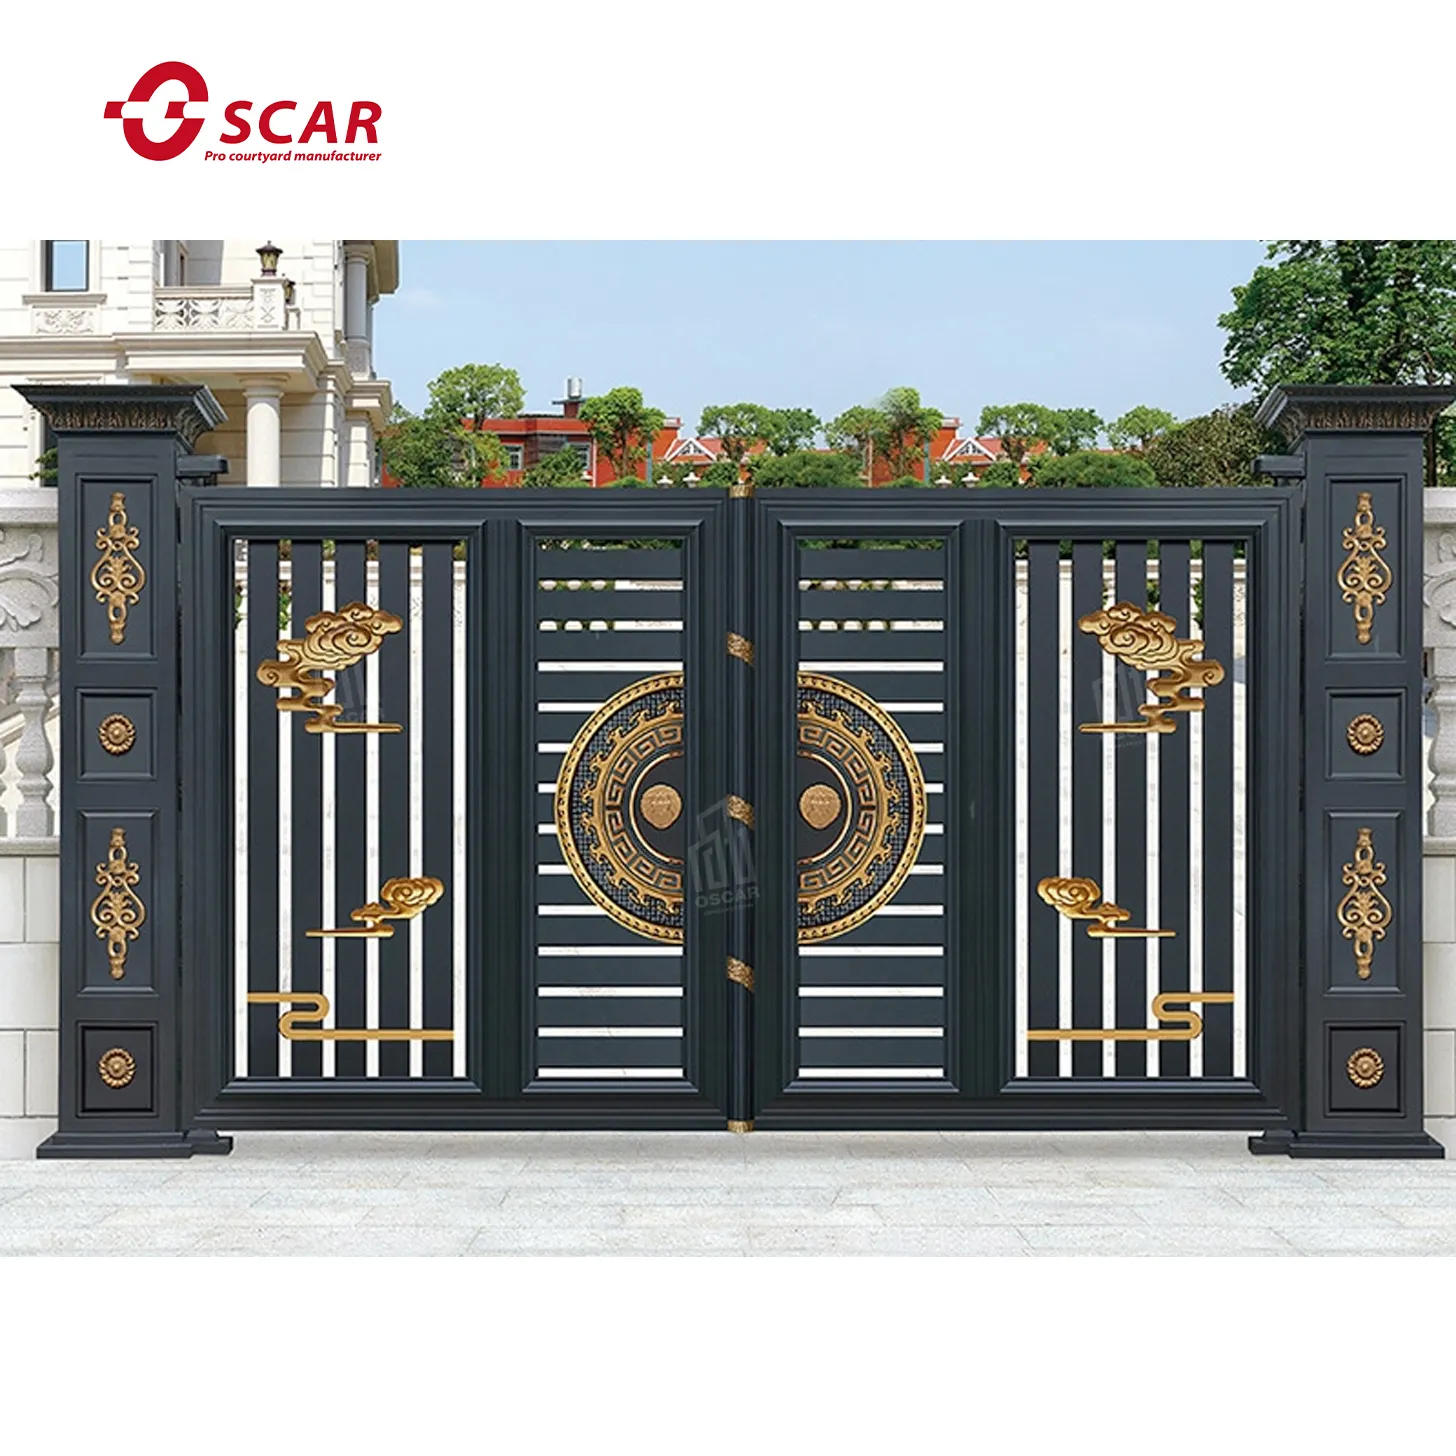 Wrought Iron Side Gates Decorative Wrought Iron Gate Accessories Latest Main Gate Design with Wheel Swing Gate Opener